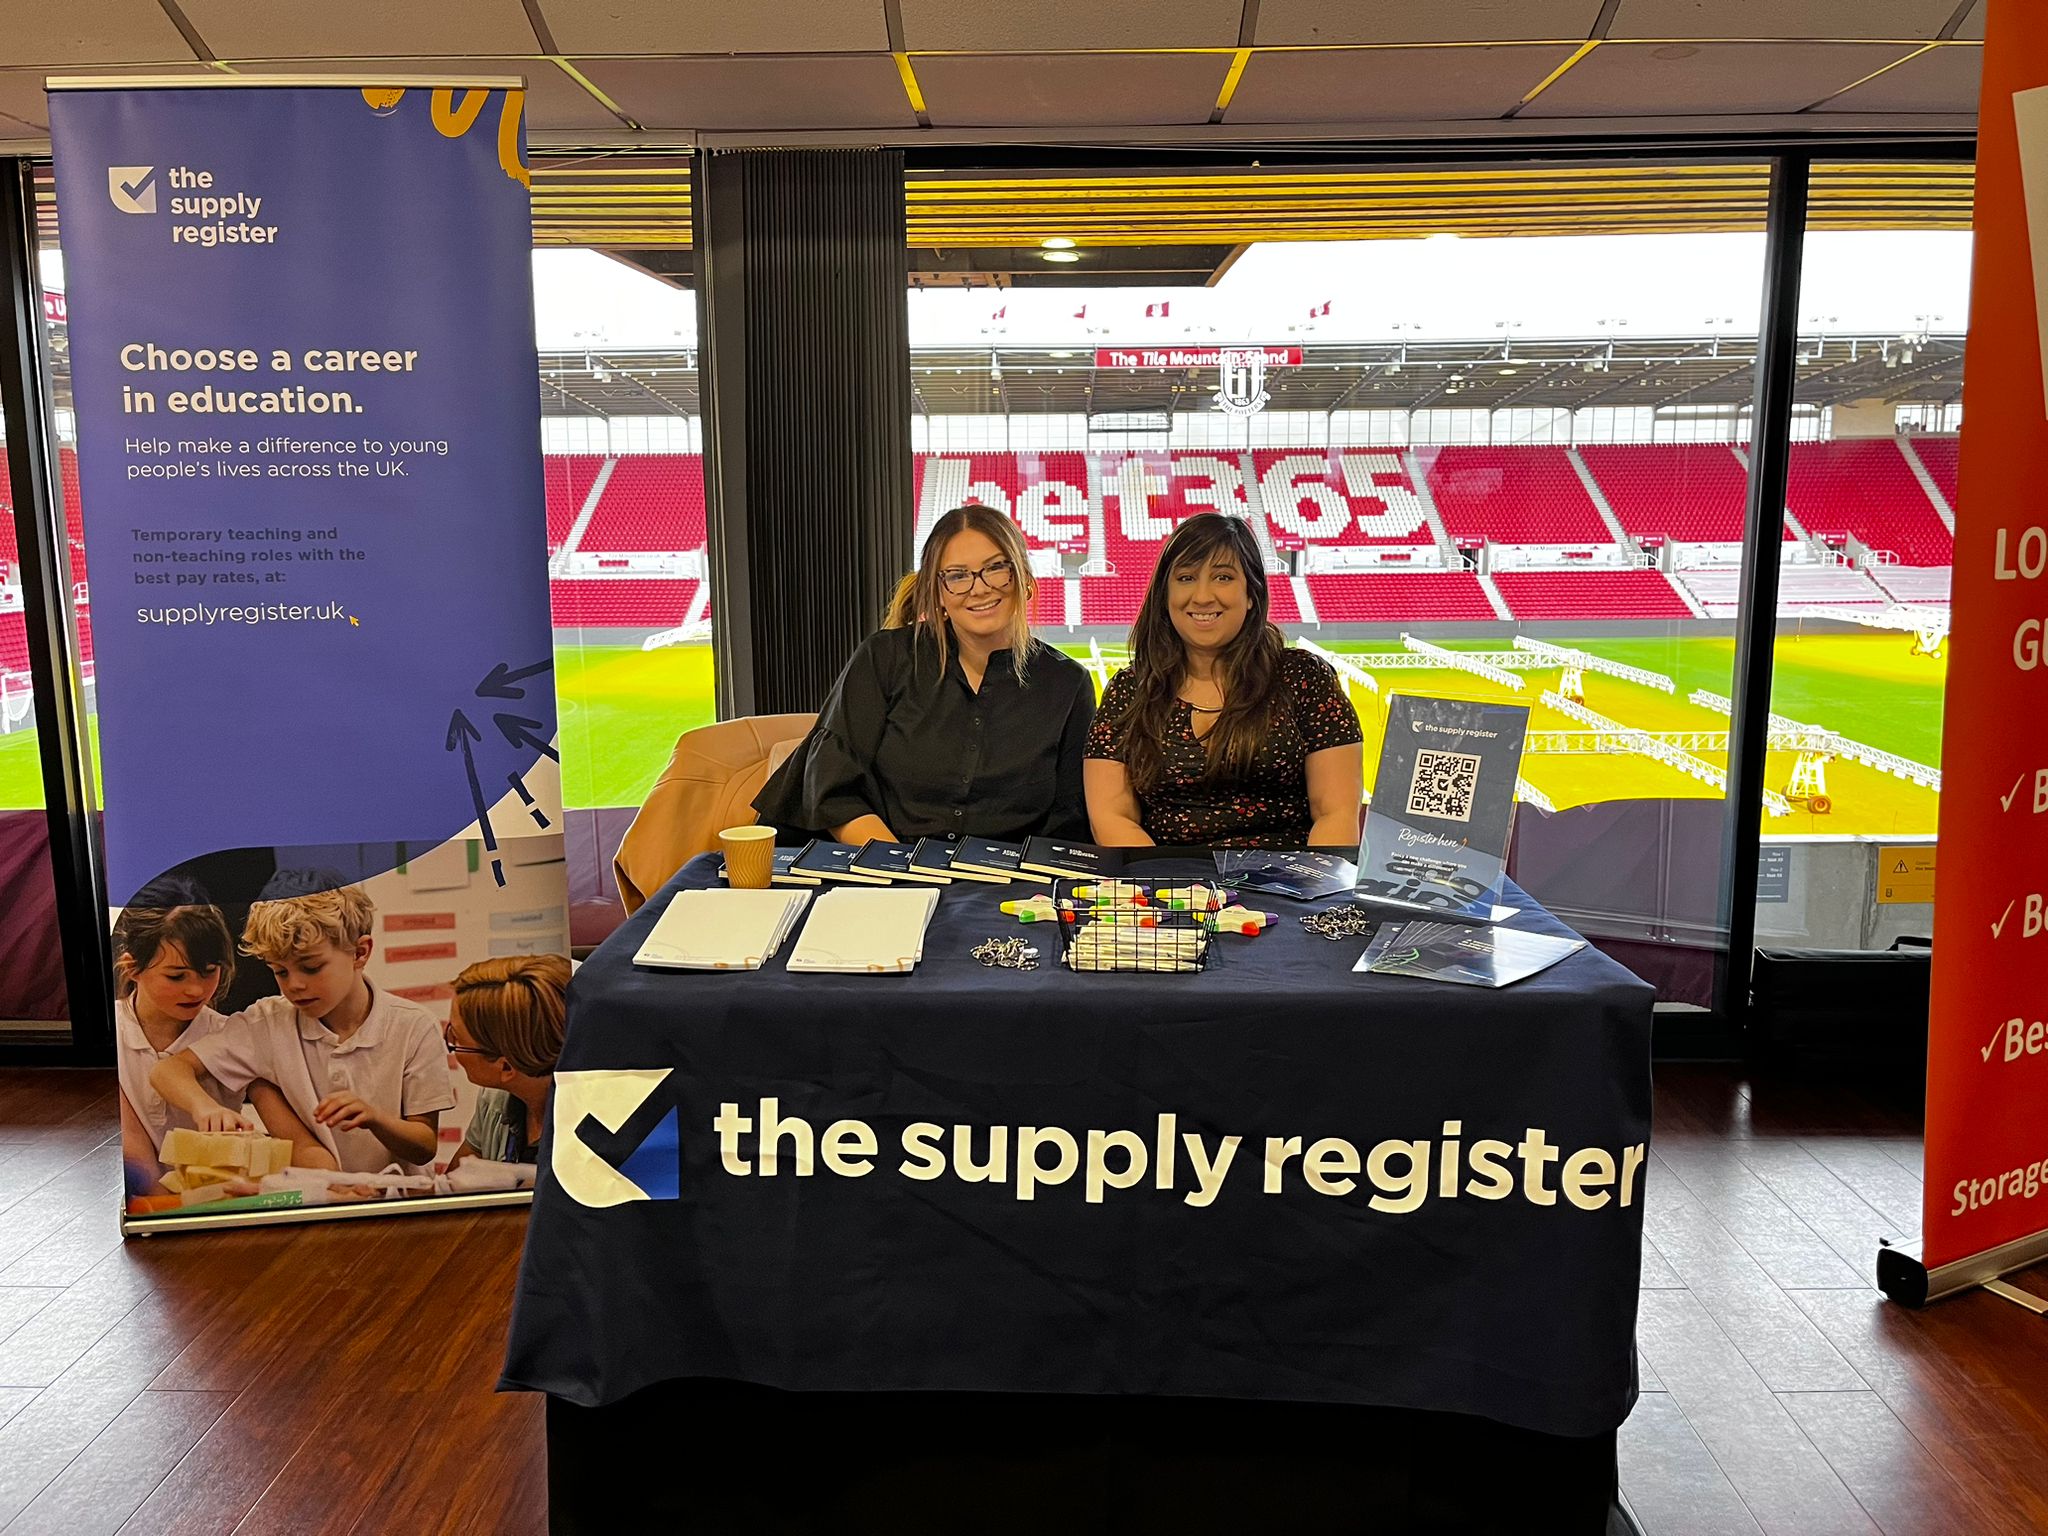 The Supply Register at our event in Stoke-on-Trent